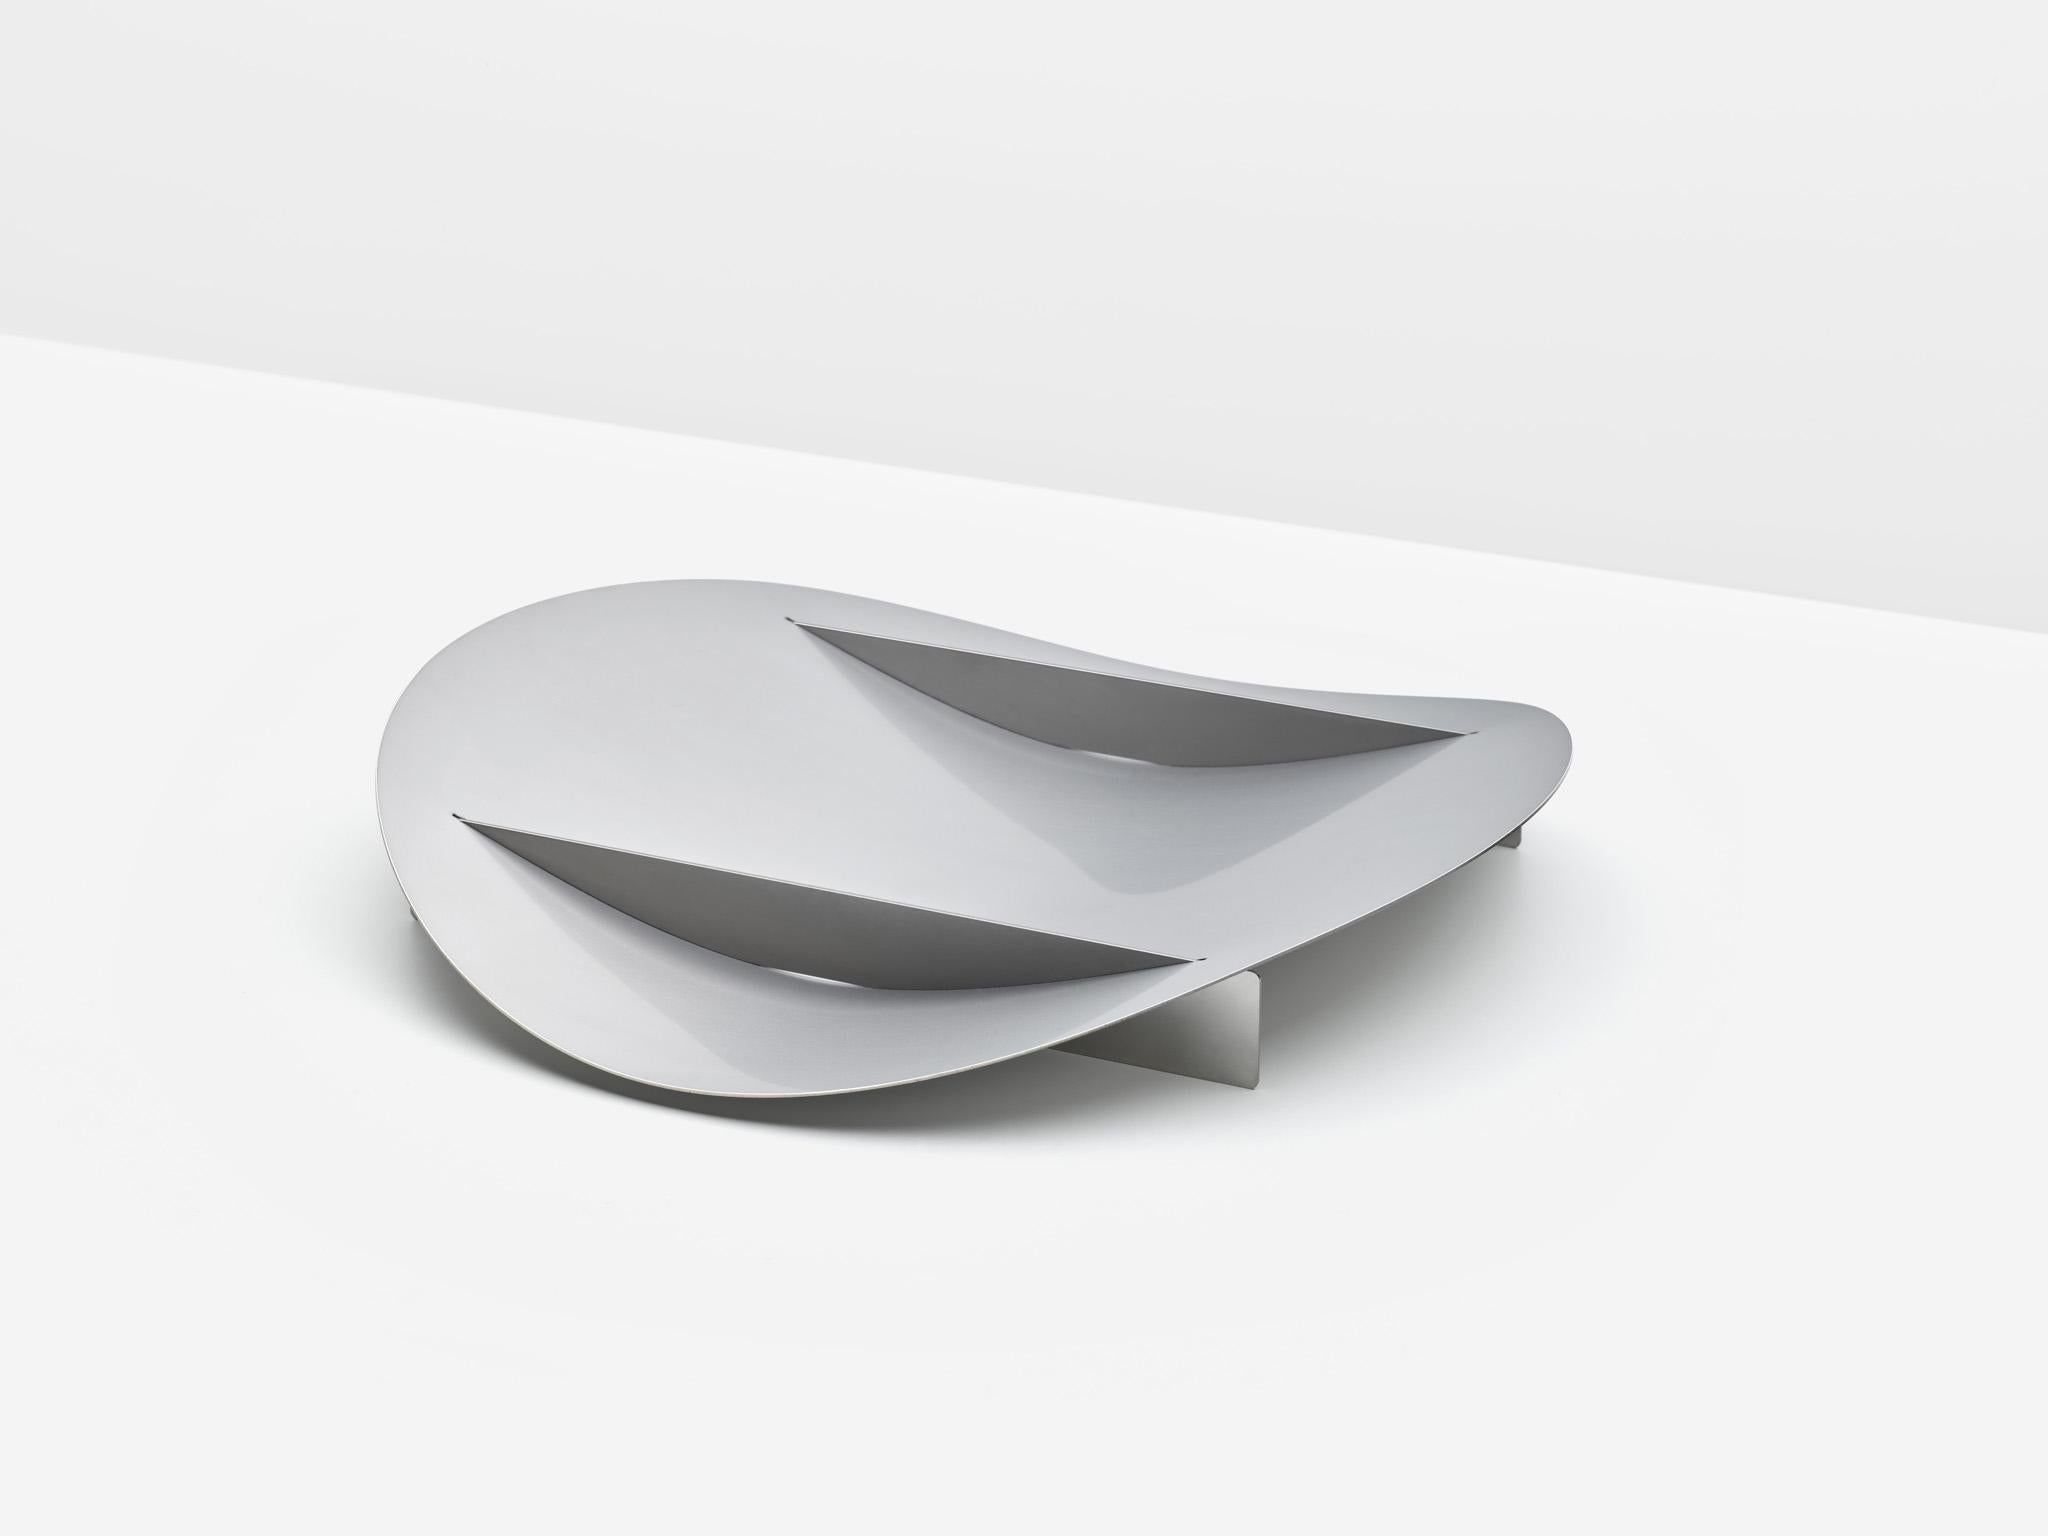 Stainless steel tension bowl by Paul Coenen
Dimensions: Ø 40 x H 6 cm
Materials: stainless Steel

The tension bowl is assembled from three brass parts, which are locked together due to the tension in the curved sheet. No screws, welds or any